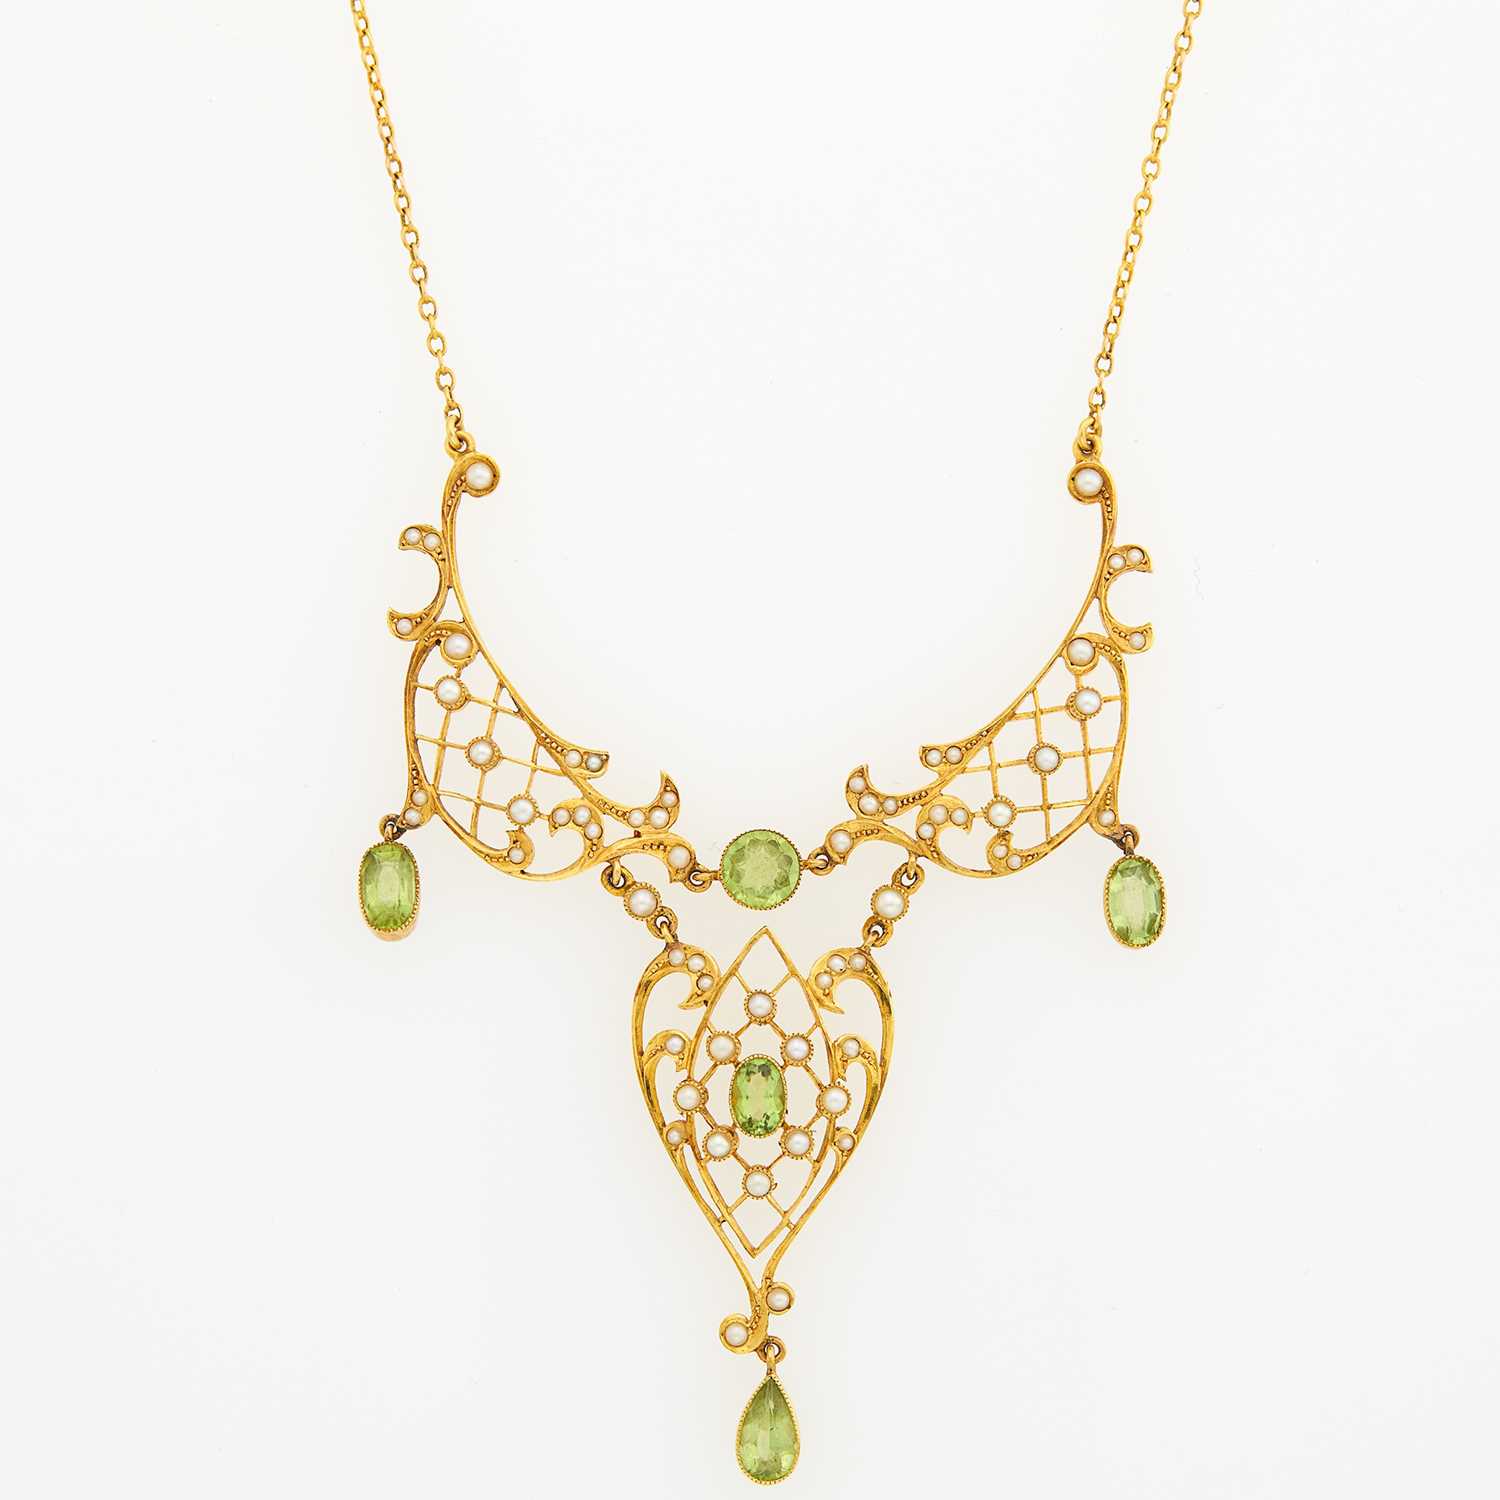 Lot 1138 - Gold, Peridot and Seed Pearl Pendant-Necklace